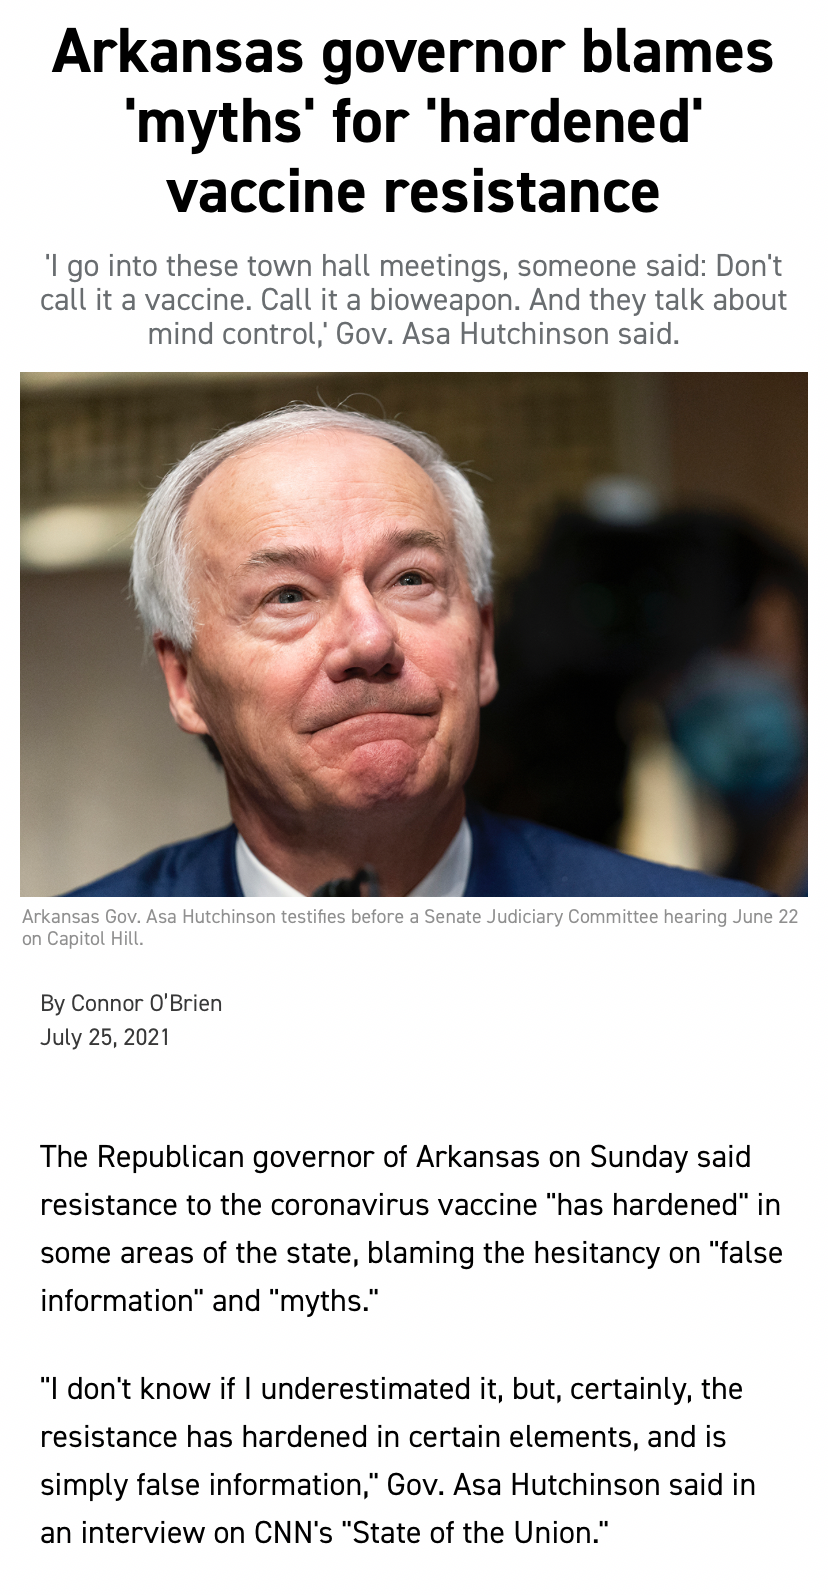 High Quality Arkansas Governor Covid-19 vaccines Blank Meme Template